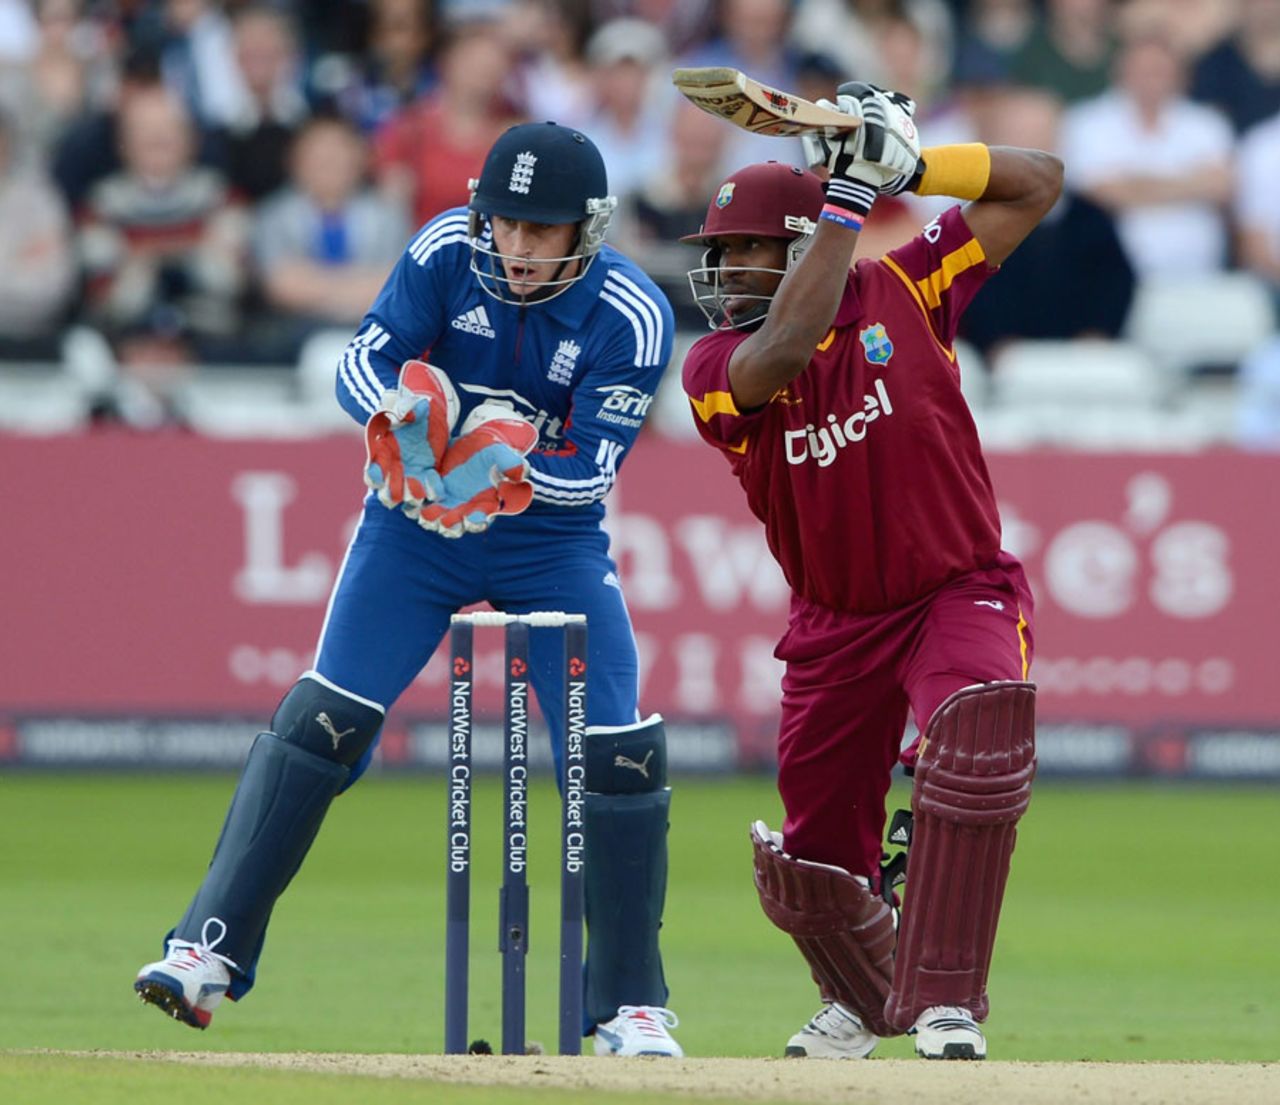 Dwayne Bravo peppered the boundary in the closing overs, England v West Indies, T20I, Trent Bridge, June, 24, 2012